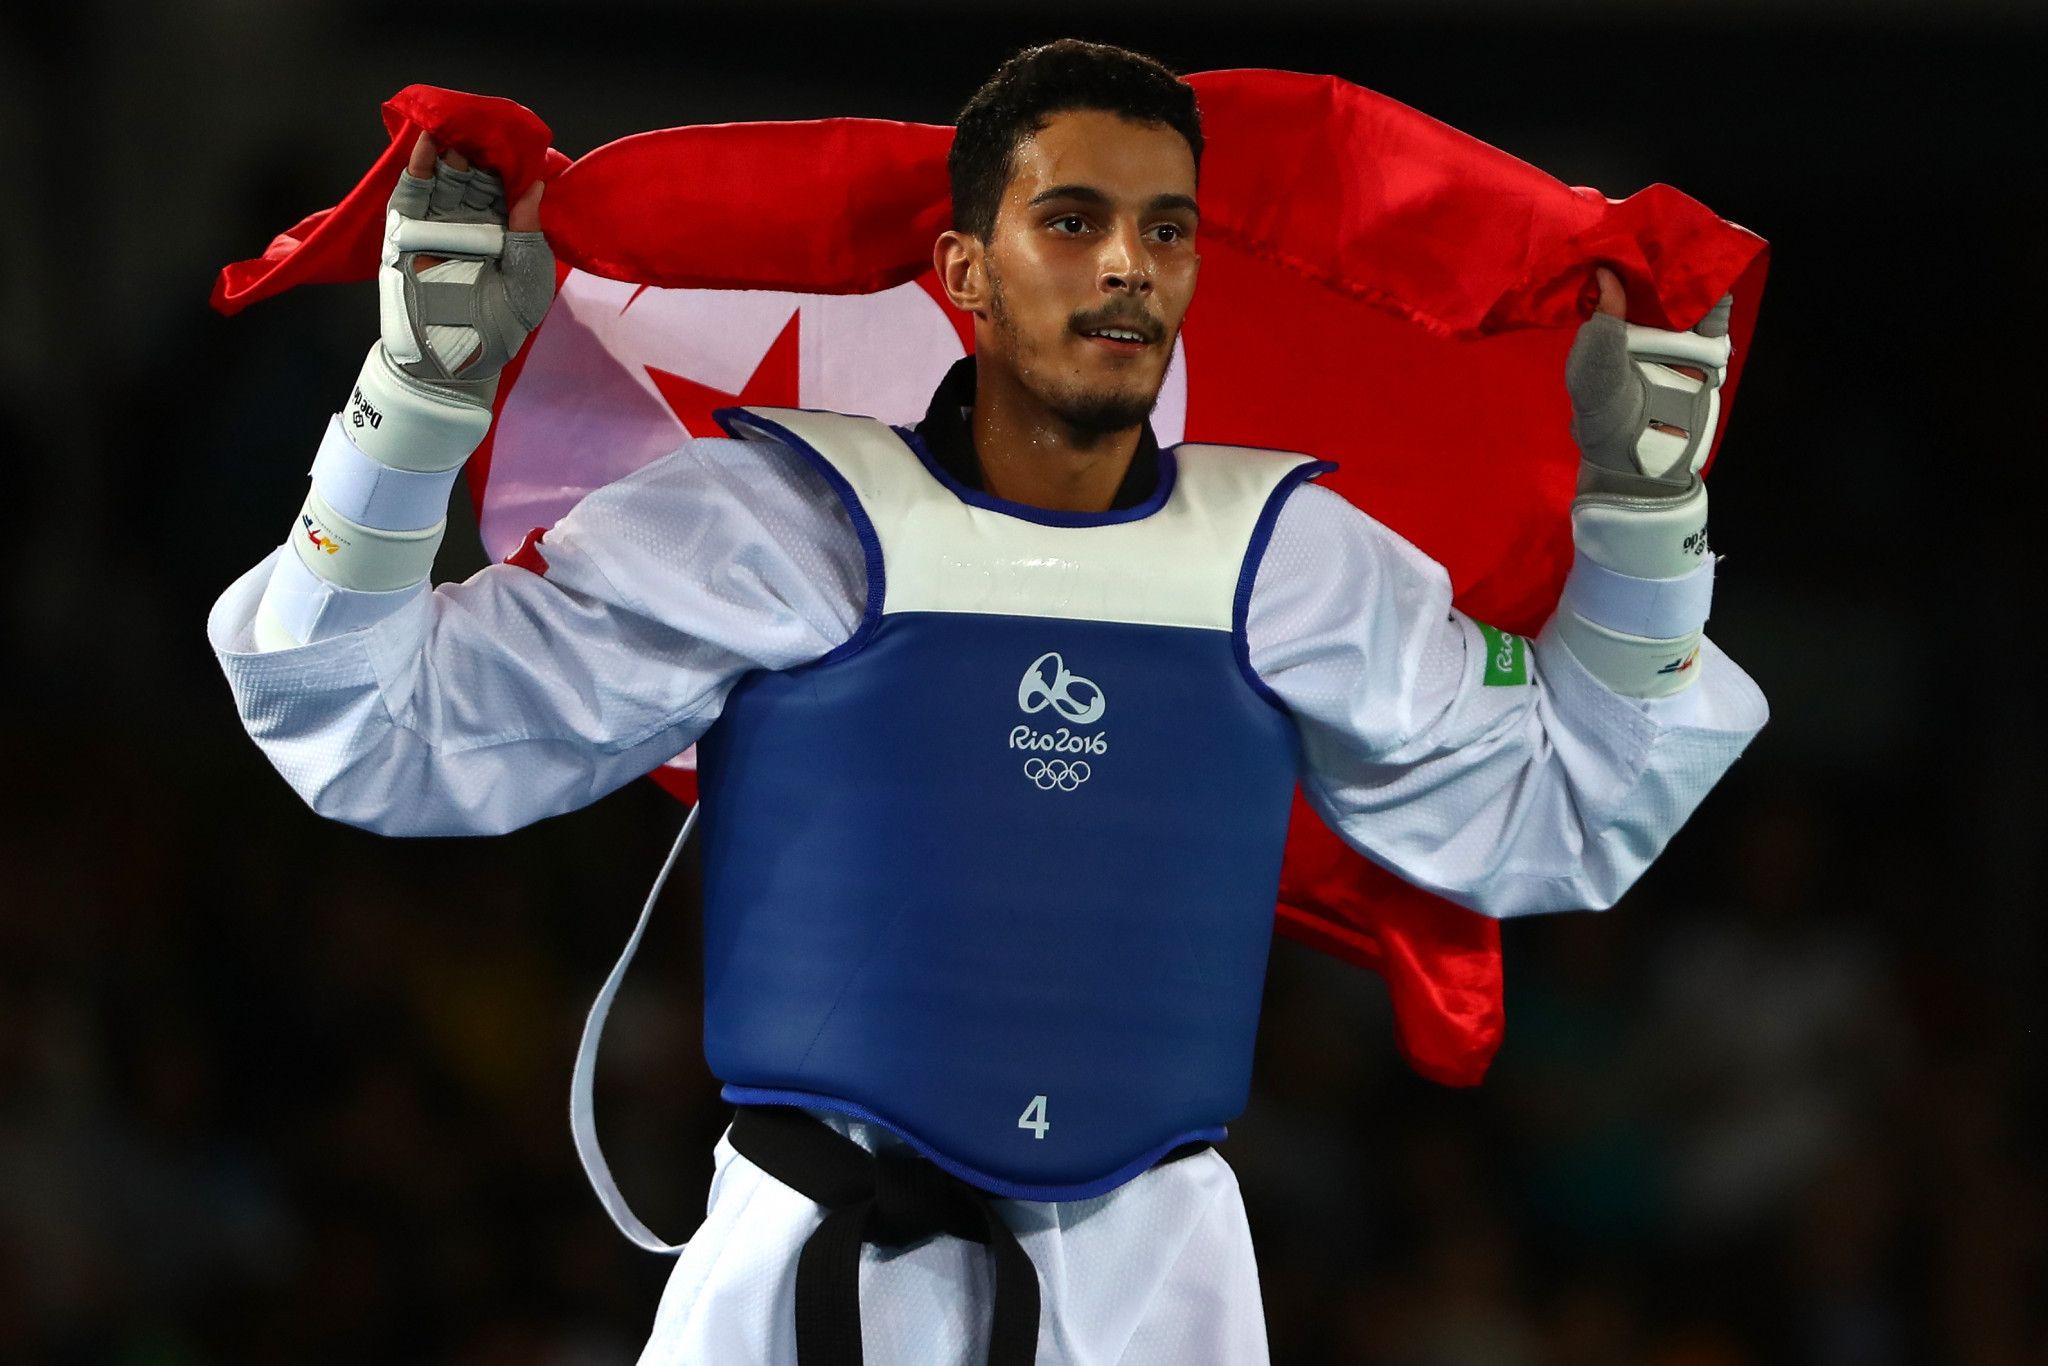 Oussama Oueslati won Olympic silver at Tokyo 2020  ©Getty Images